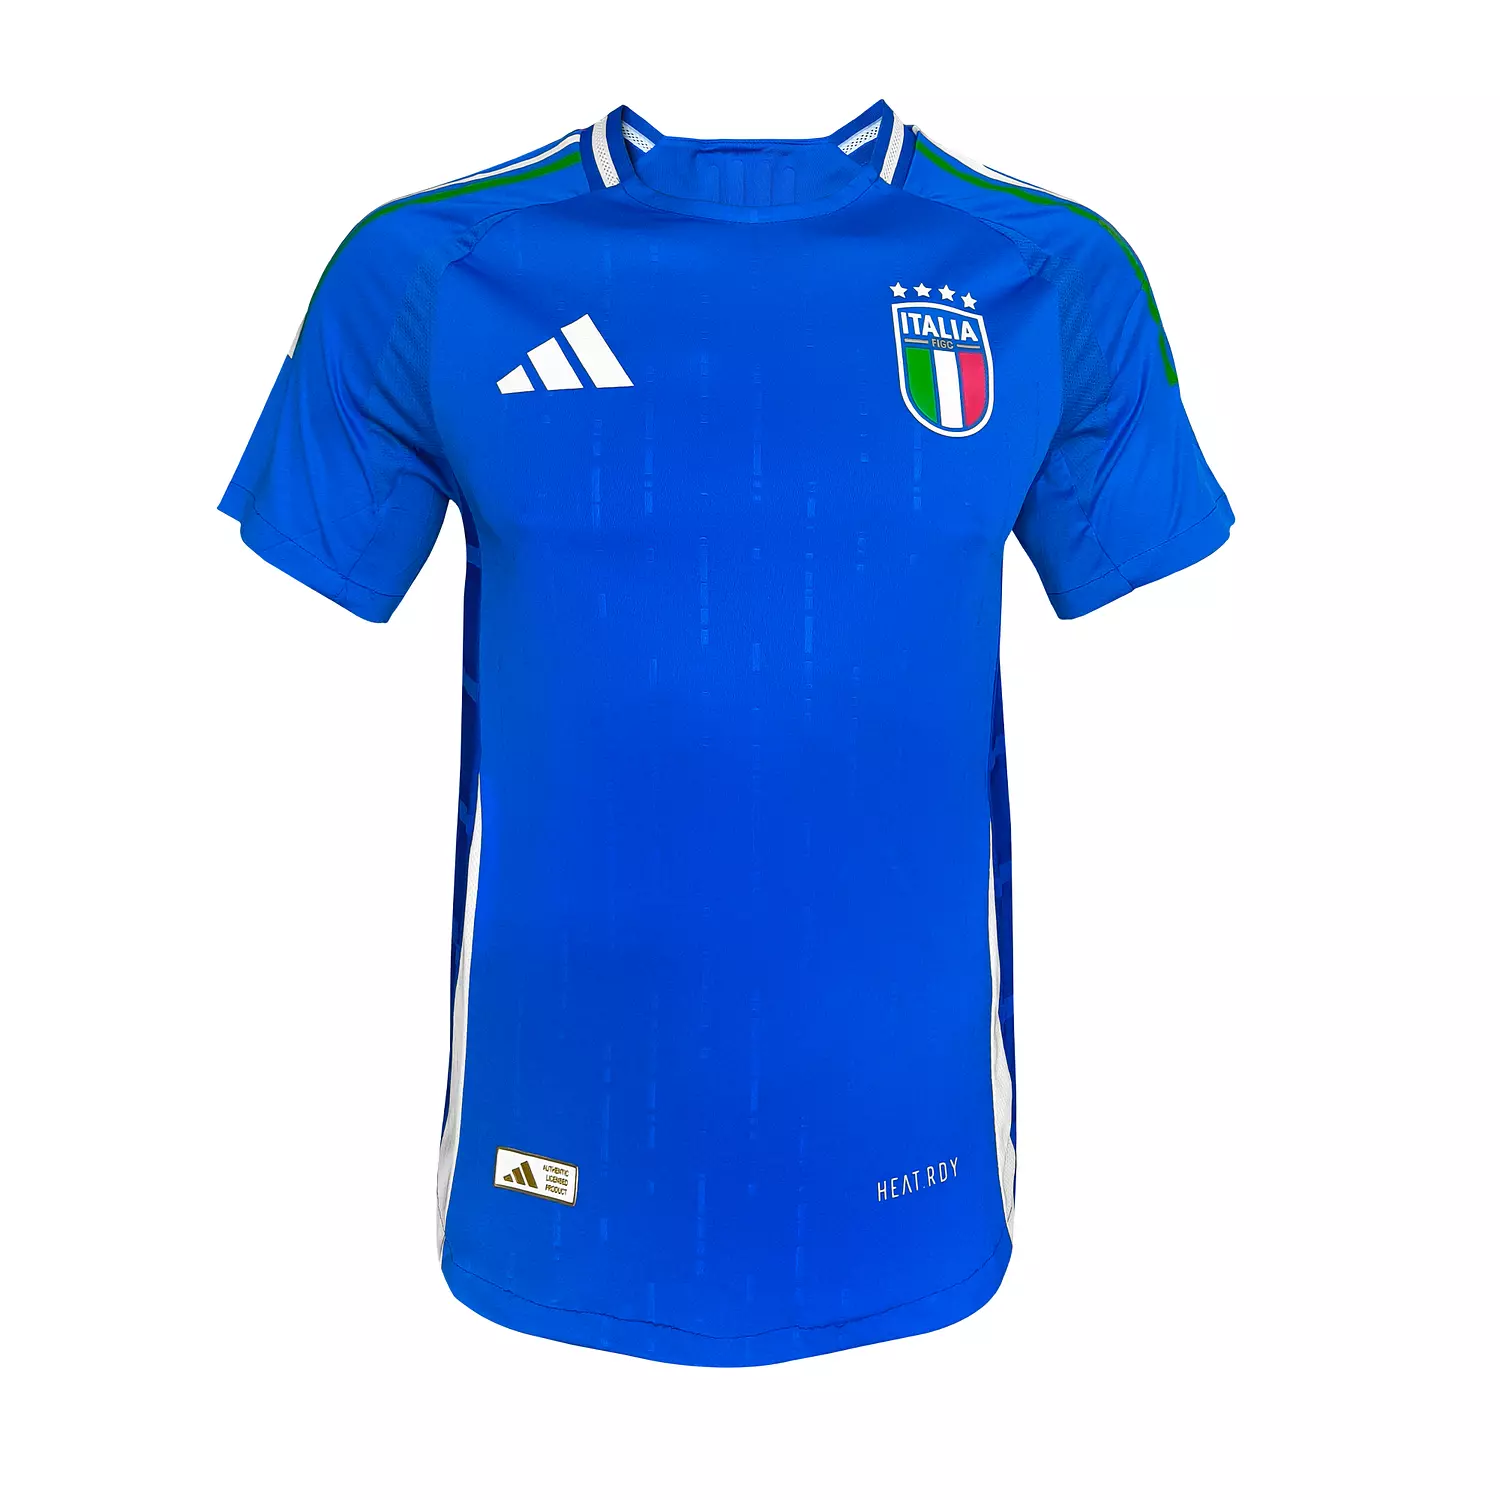 ITALY EURO 24 PLAYER - NATIONAL TEAM 0